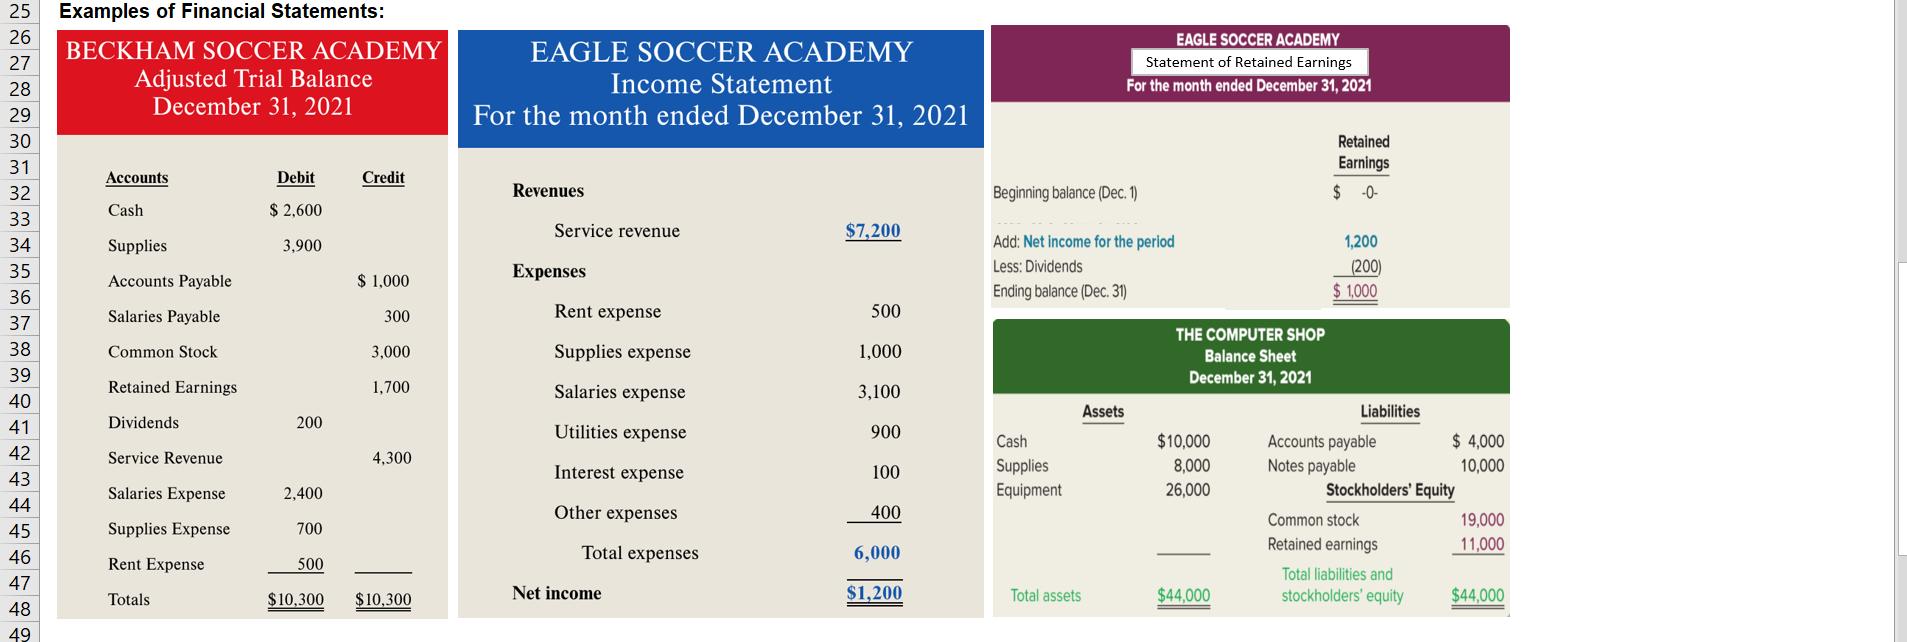 Examples of Financial Statements: BECKHAM SOCCER ACADEMY Adjusted Trial Balance December 31, 2021 EAGLE SOCCER ACADEMY Income